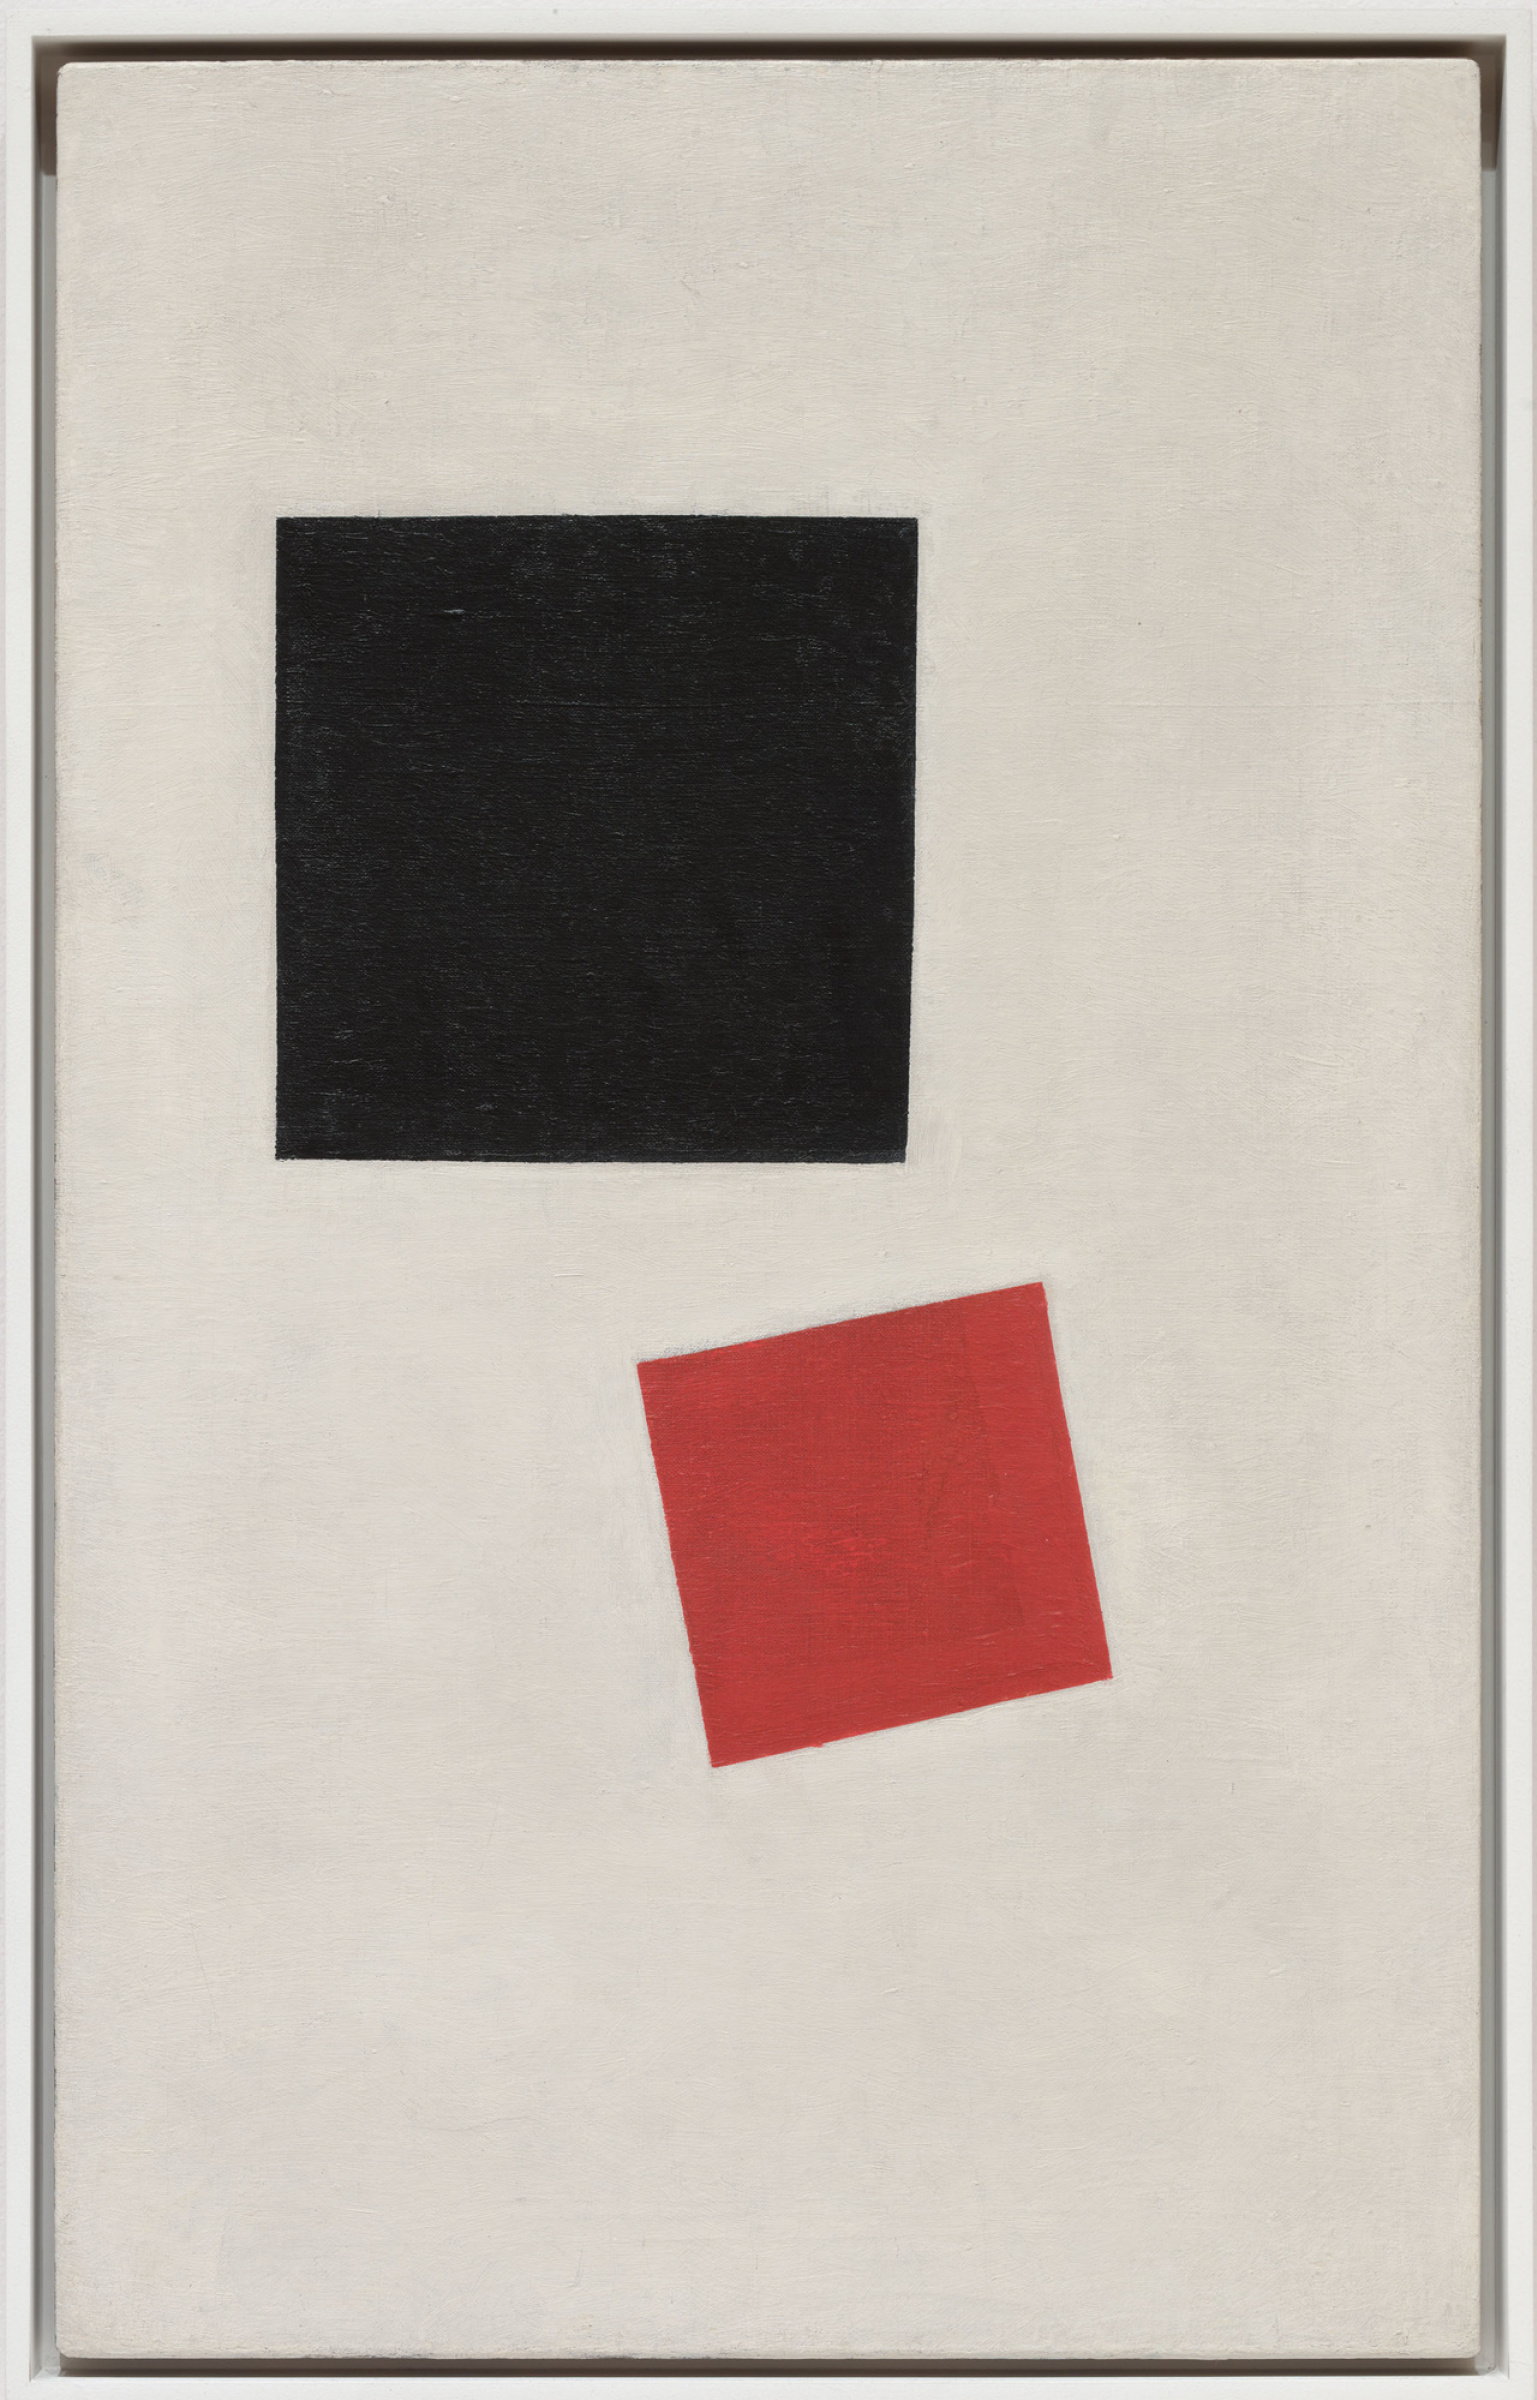 Humanistisk der Forstå Black square and red square (Picturesque realism. A boy with a knapsack. -  Colorful masses in the fourth dimension)., 1915, 44×71 cm by Kazimir  Malevich: History, Analysis & Facts | Arthive